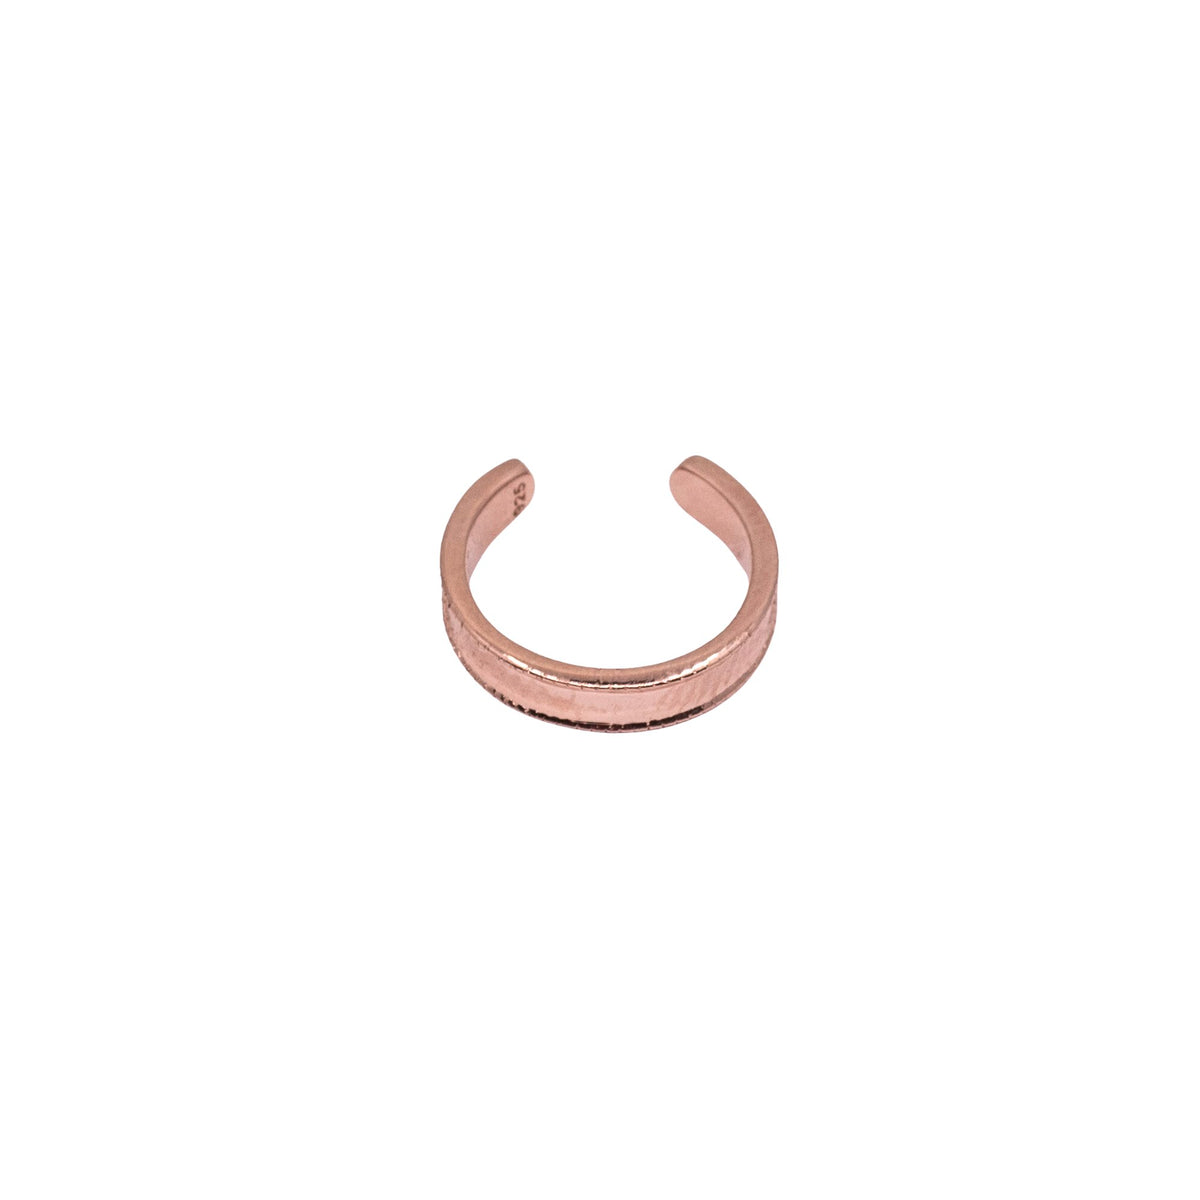 Rose Gold Ear Cuffs Concave Ear Cuff The Curated Lobeconchno piercing